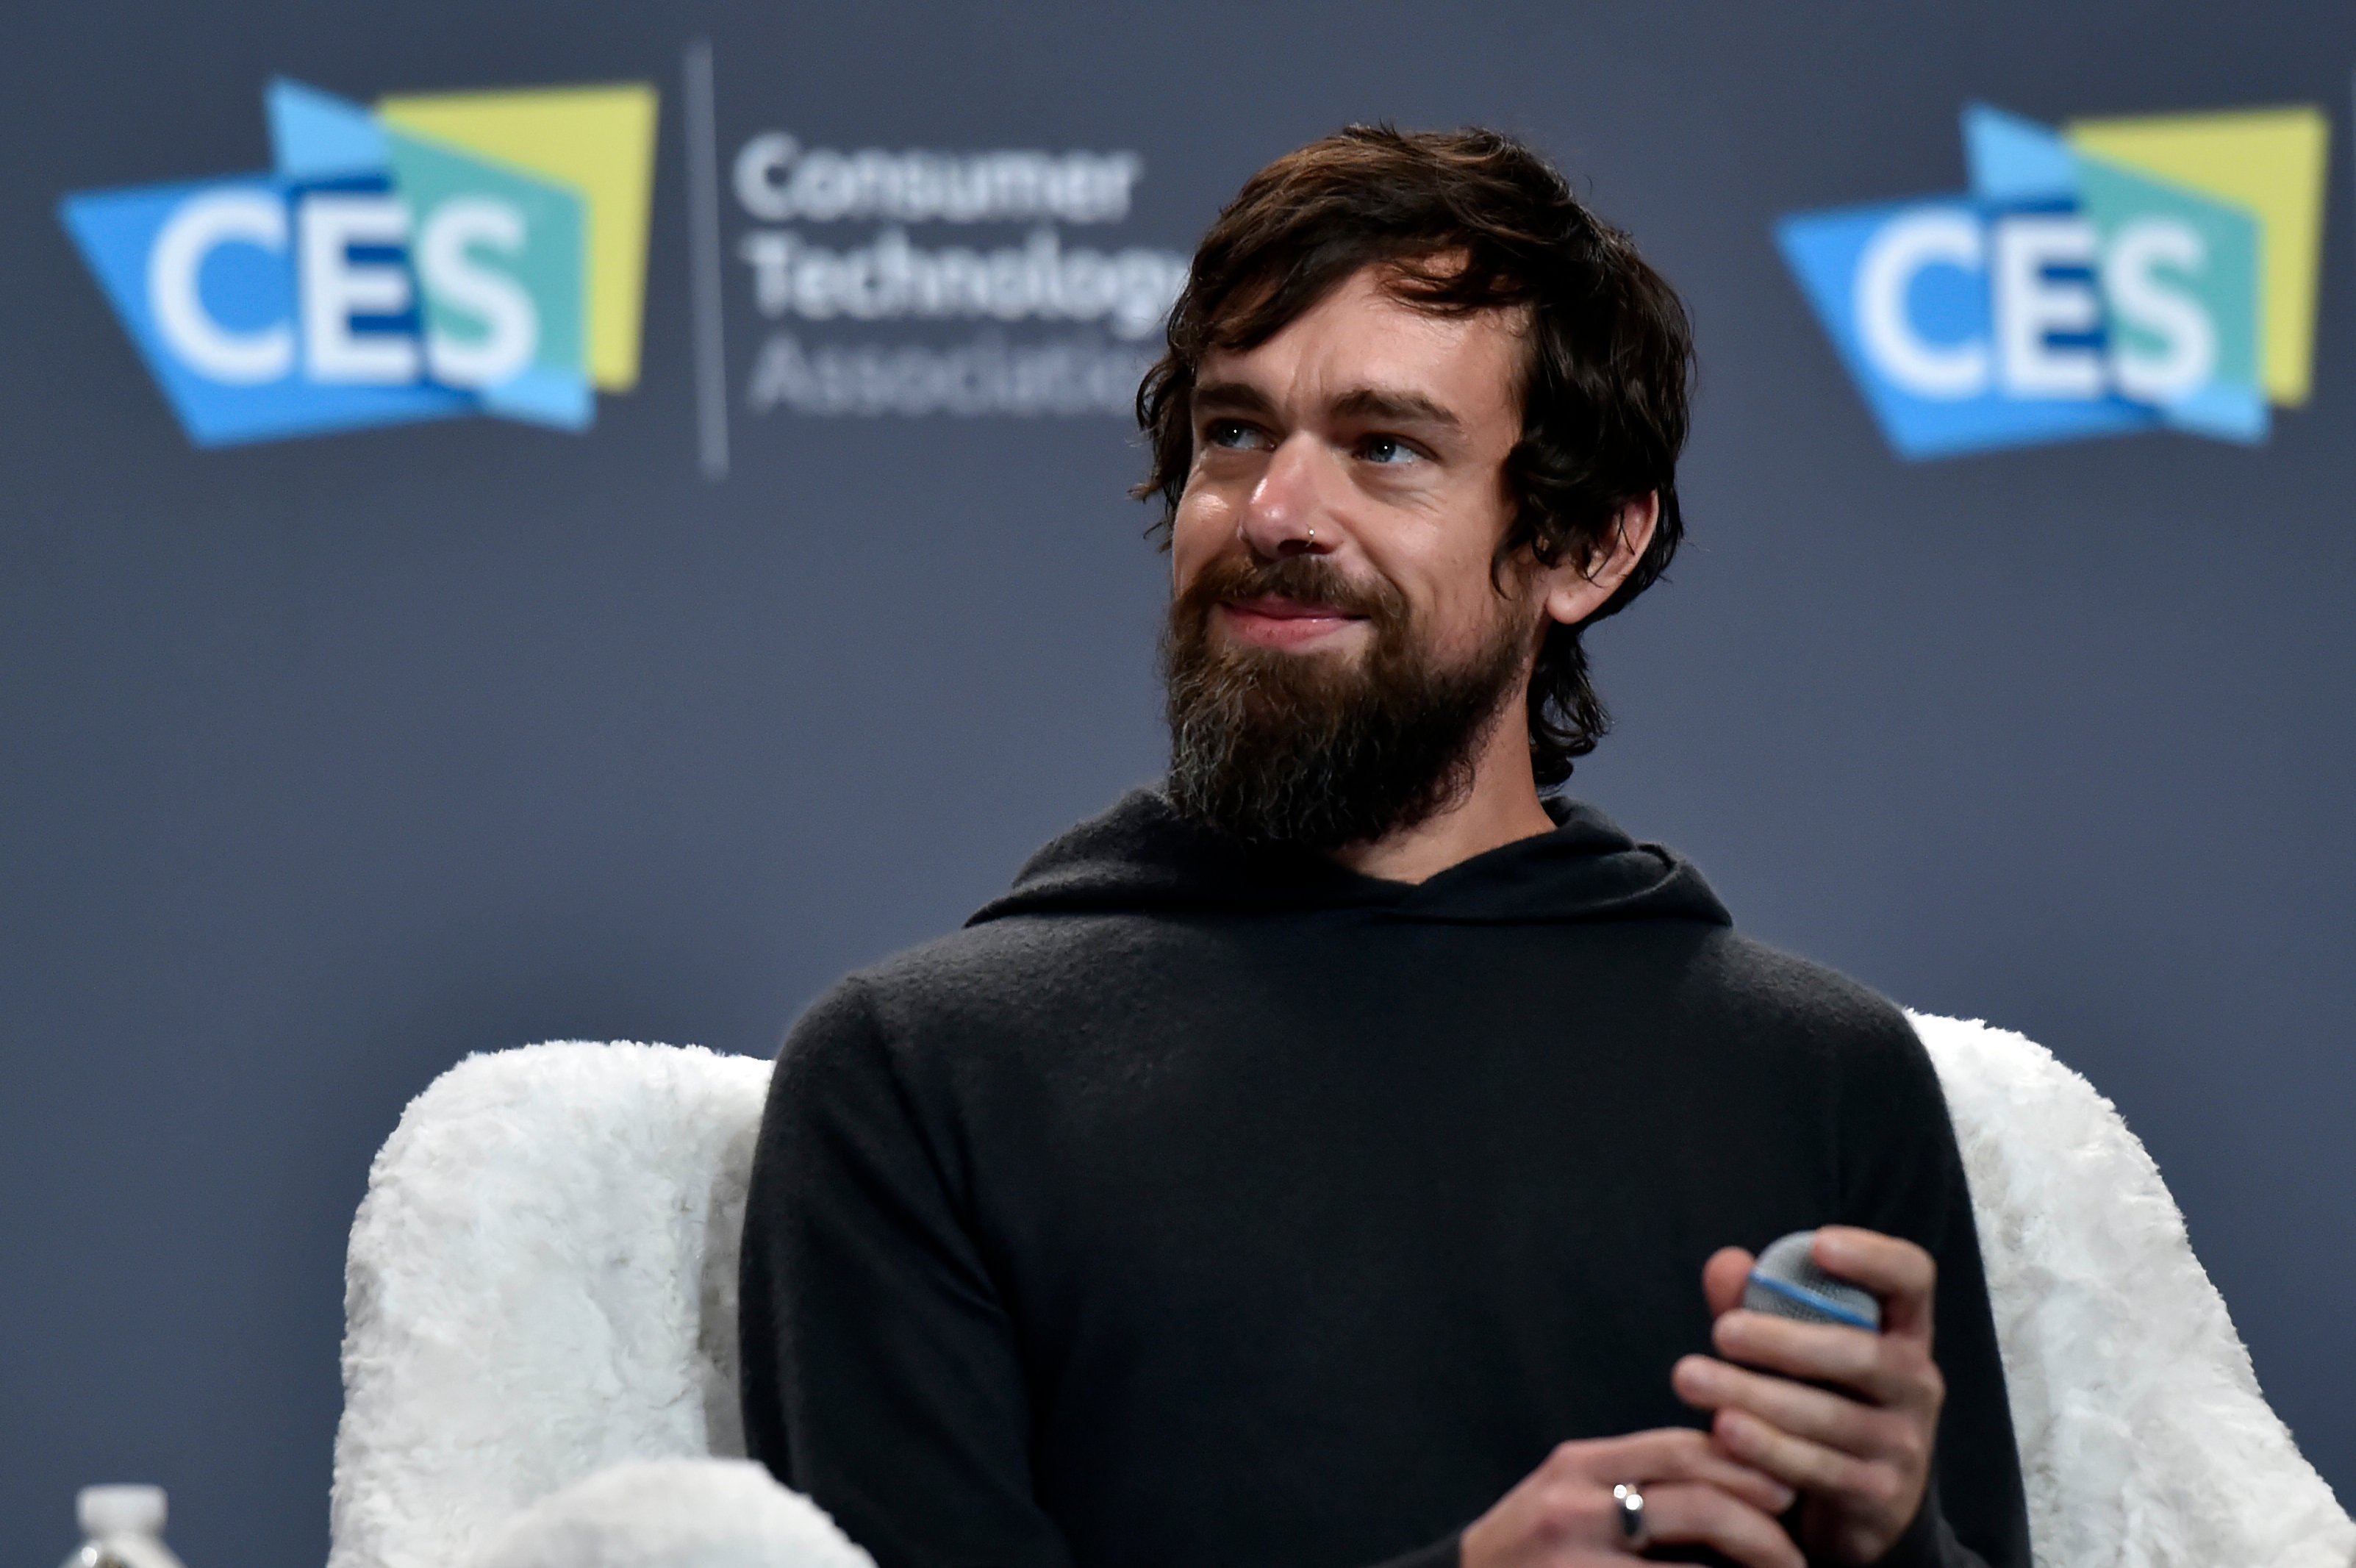 Twitter CEO Jack Dorsey speaks during a press event at CES 2019 at the Aria Resort & Casino on January 9, 2019 in Las Vegas, Nevada. (Photo by David Becker/Getty Images)